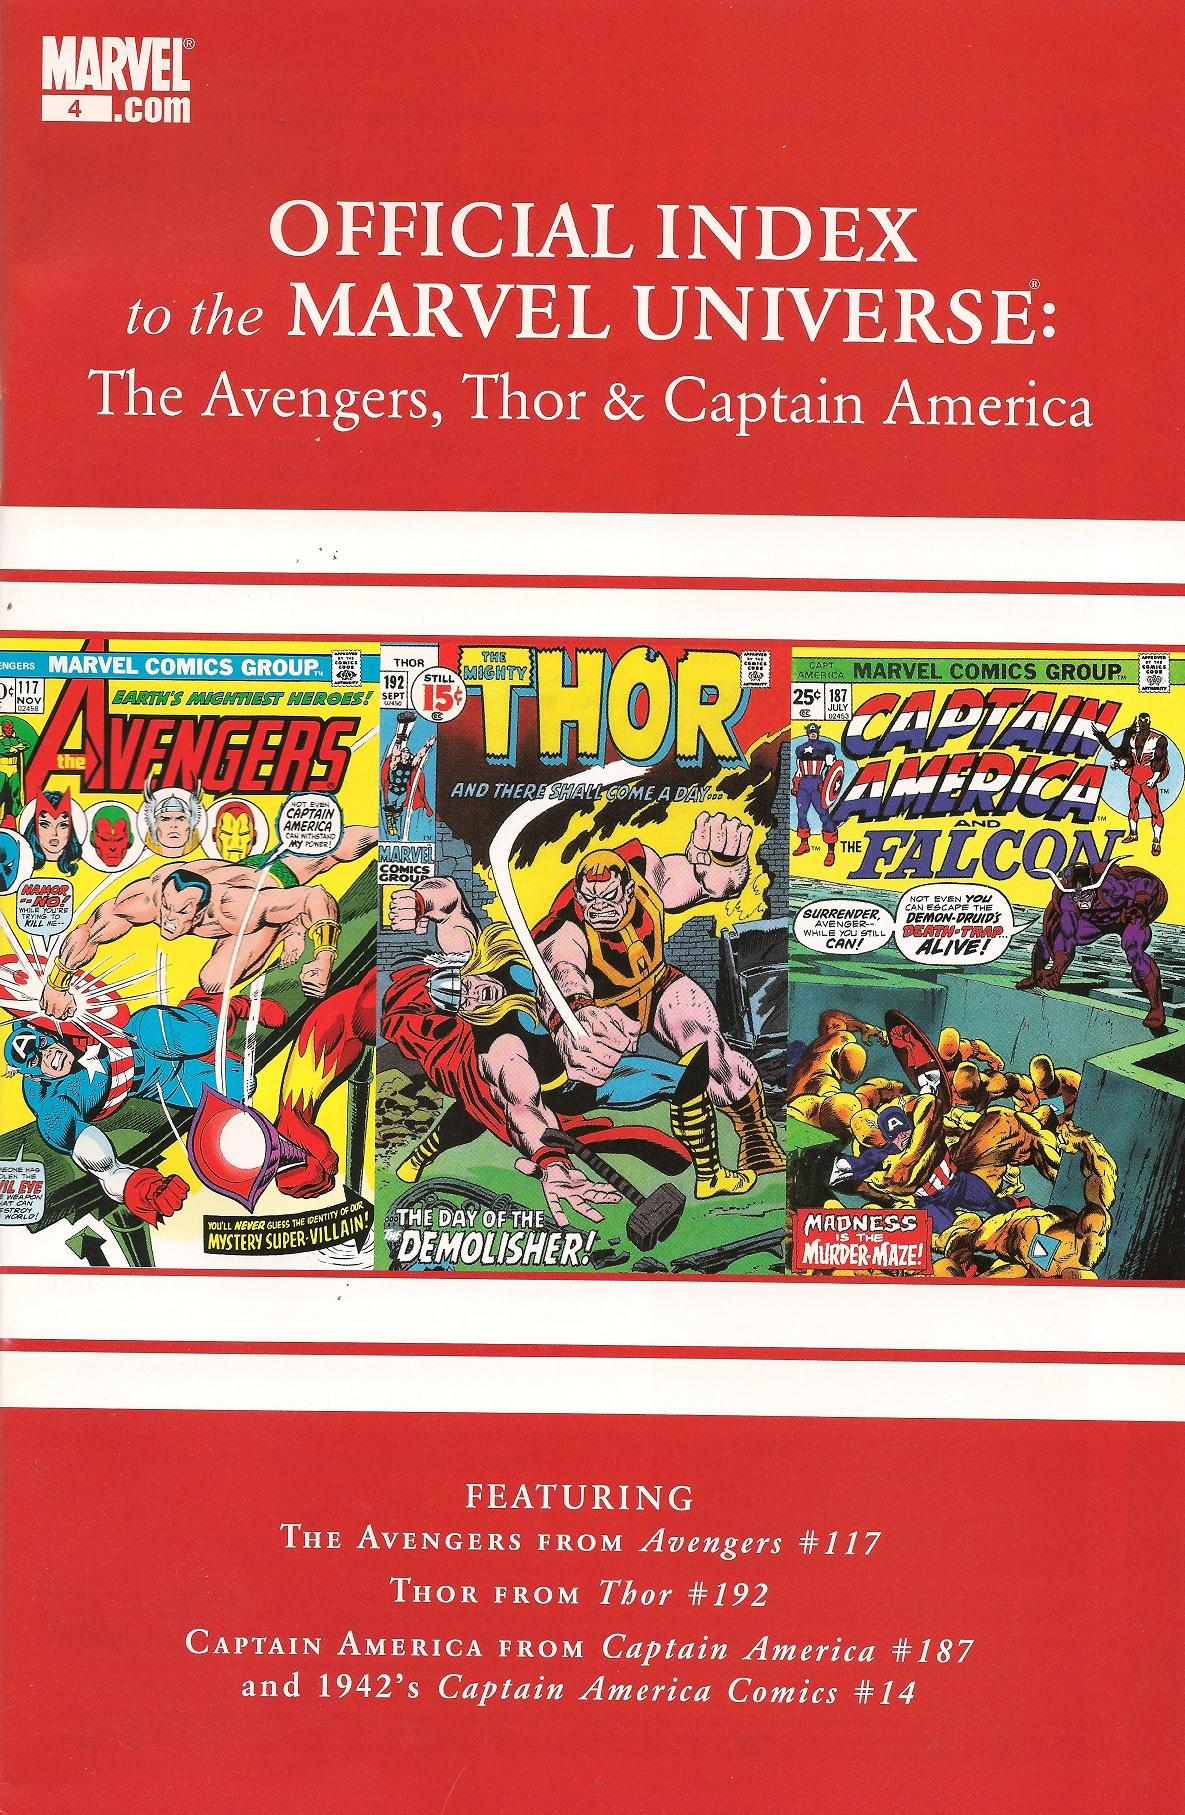 Avengers, Thor & Captain America: Official Index to the Marvel Universe Vol. 1 #4